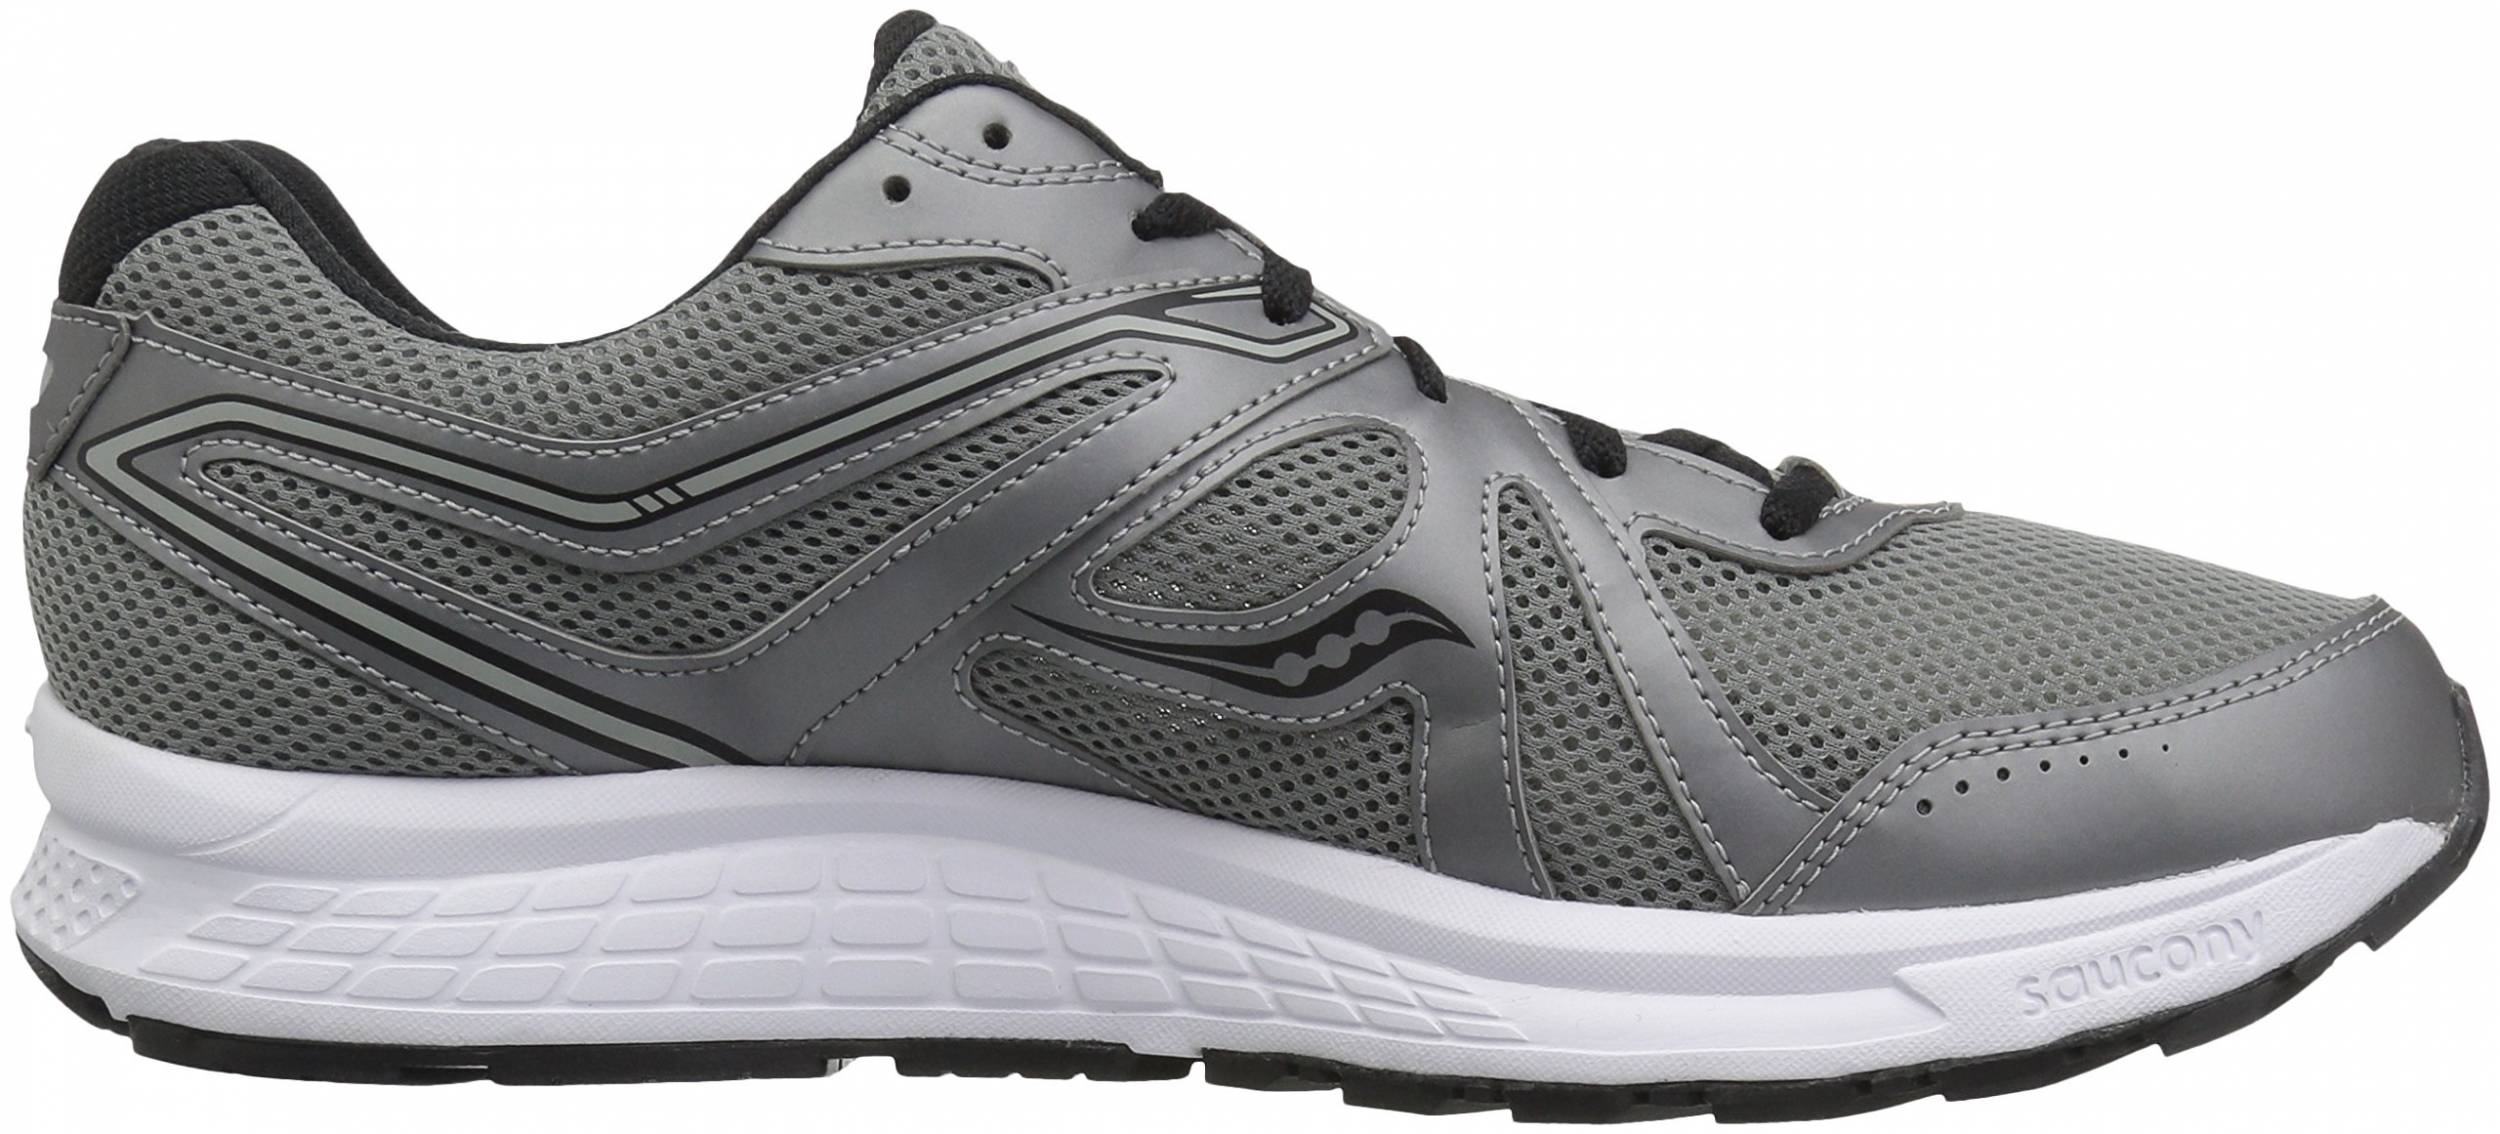 saucony men's cohesion 8 running shoe review